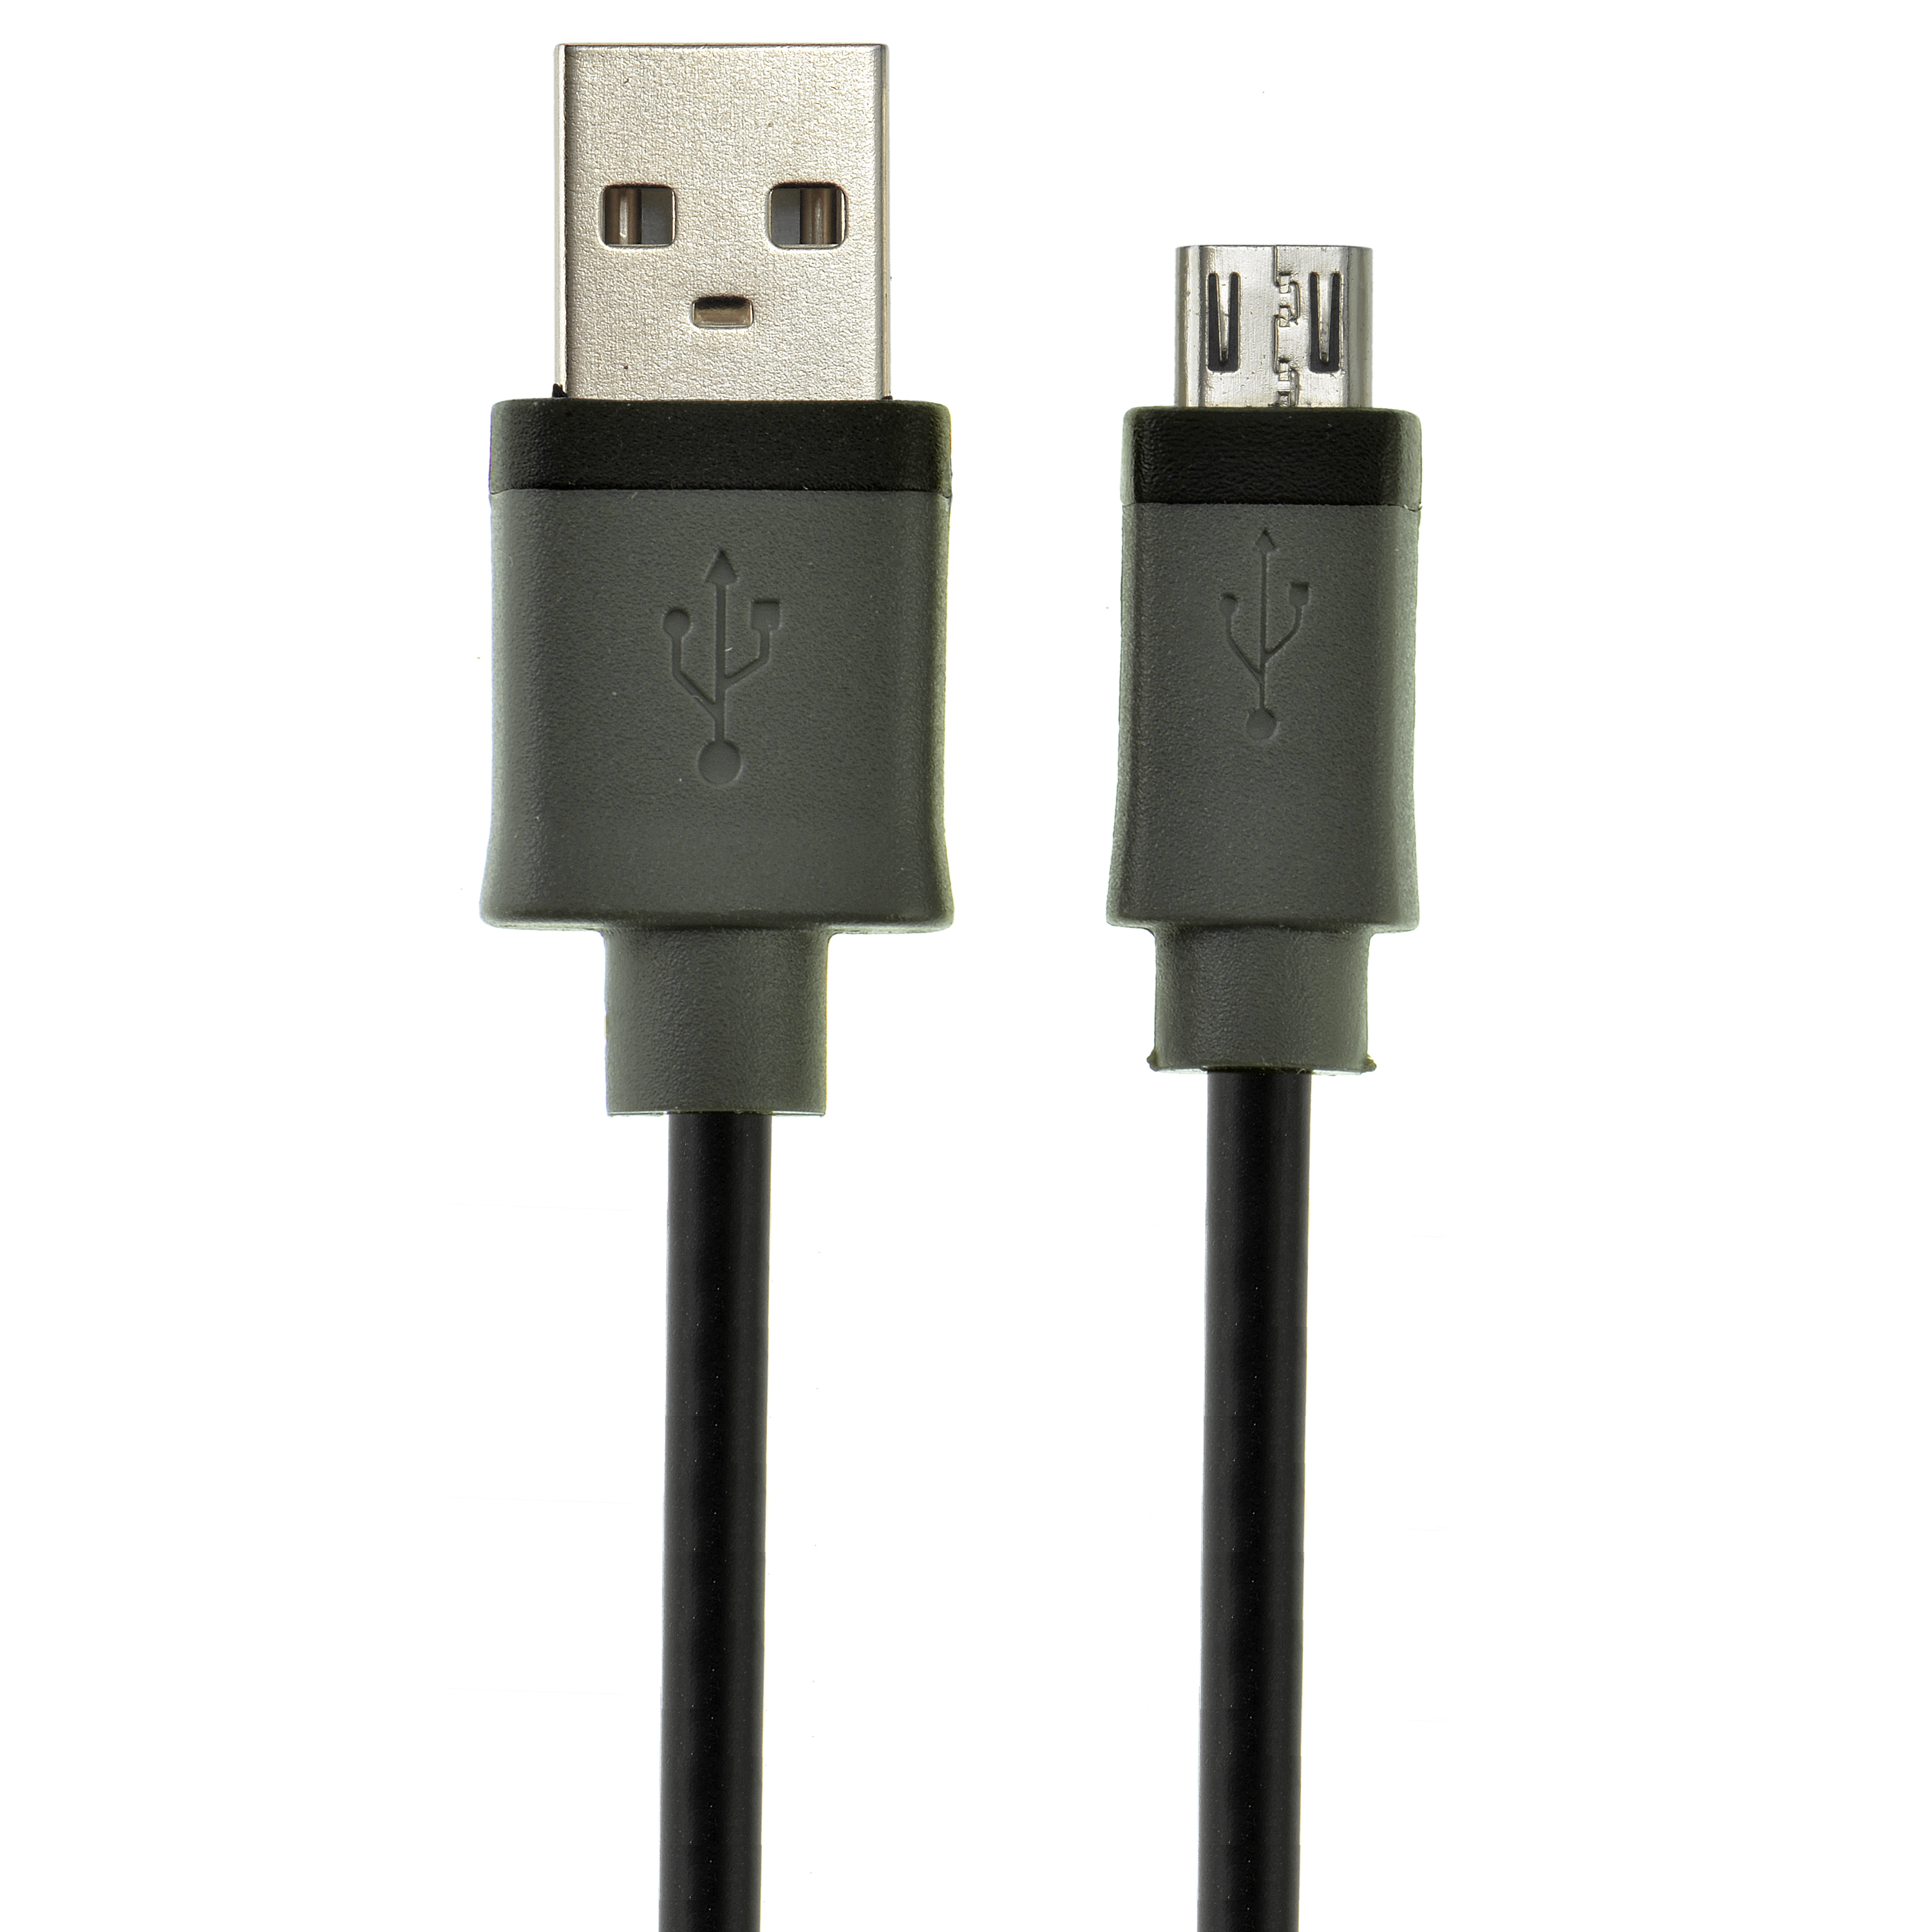 Ellendig pindas Tact Shop New USB 2.0 - Micro-USB to USB Cable - High-Speed A Male to Micro B  (10 Feet) | Mediabridge Products